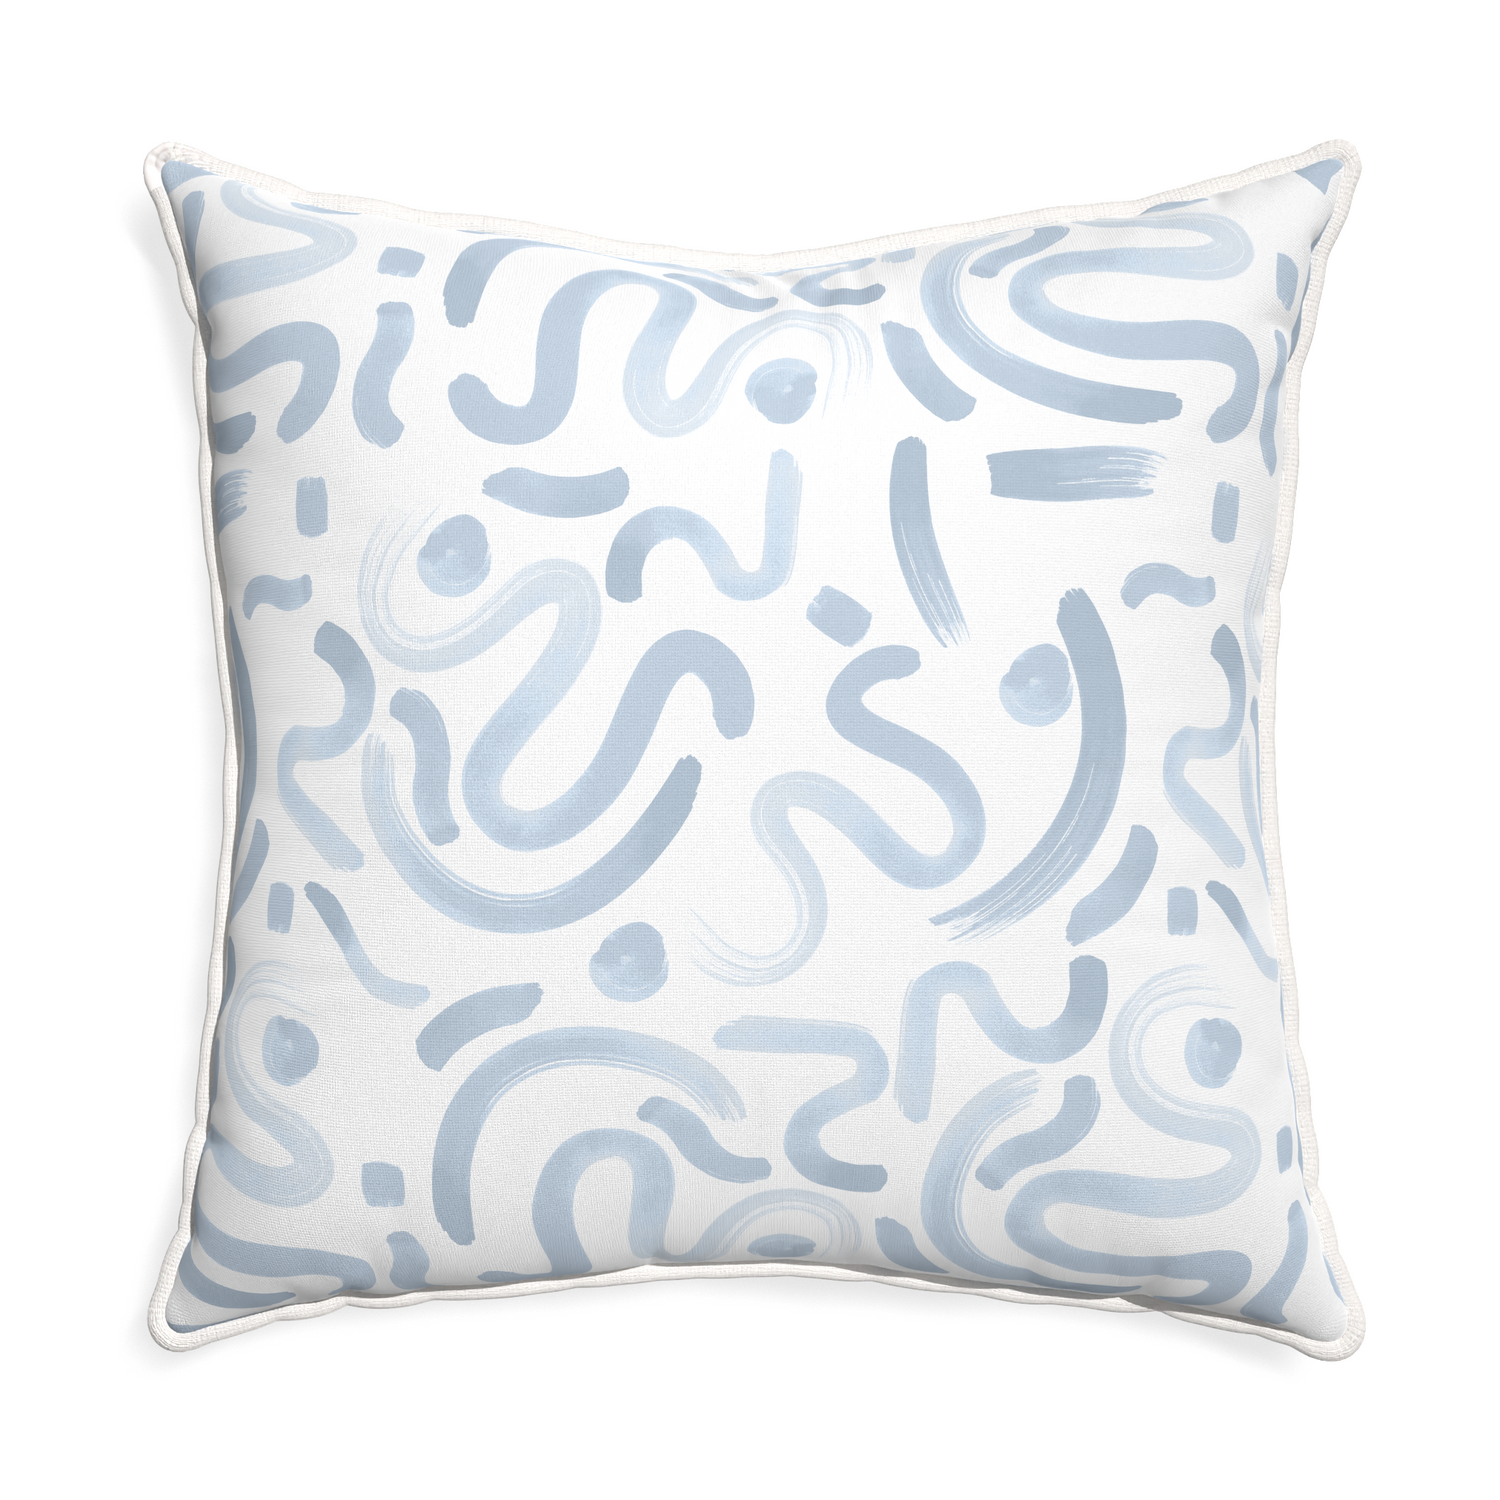 Euro-sham hockney sky custom pillow with snow piping on white background